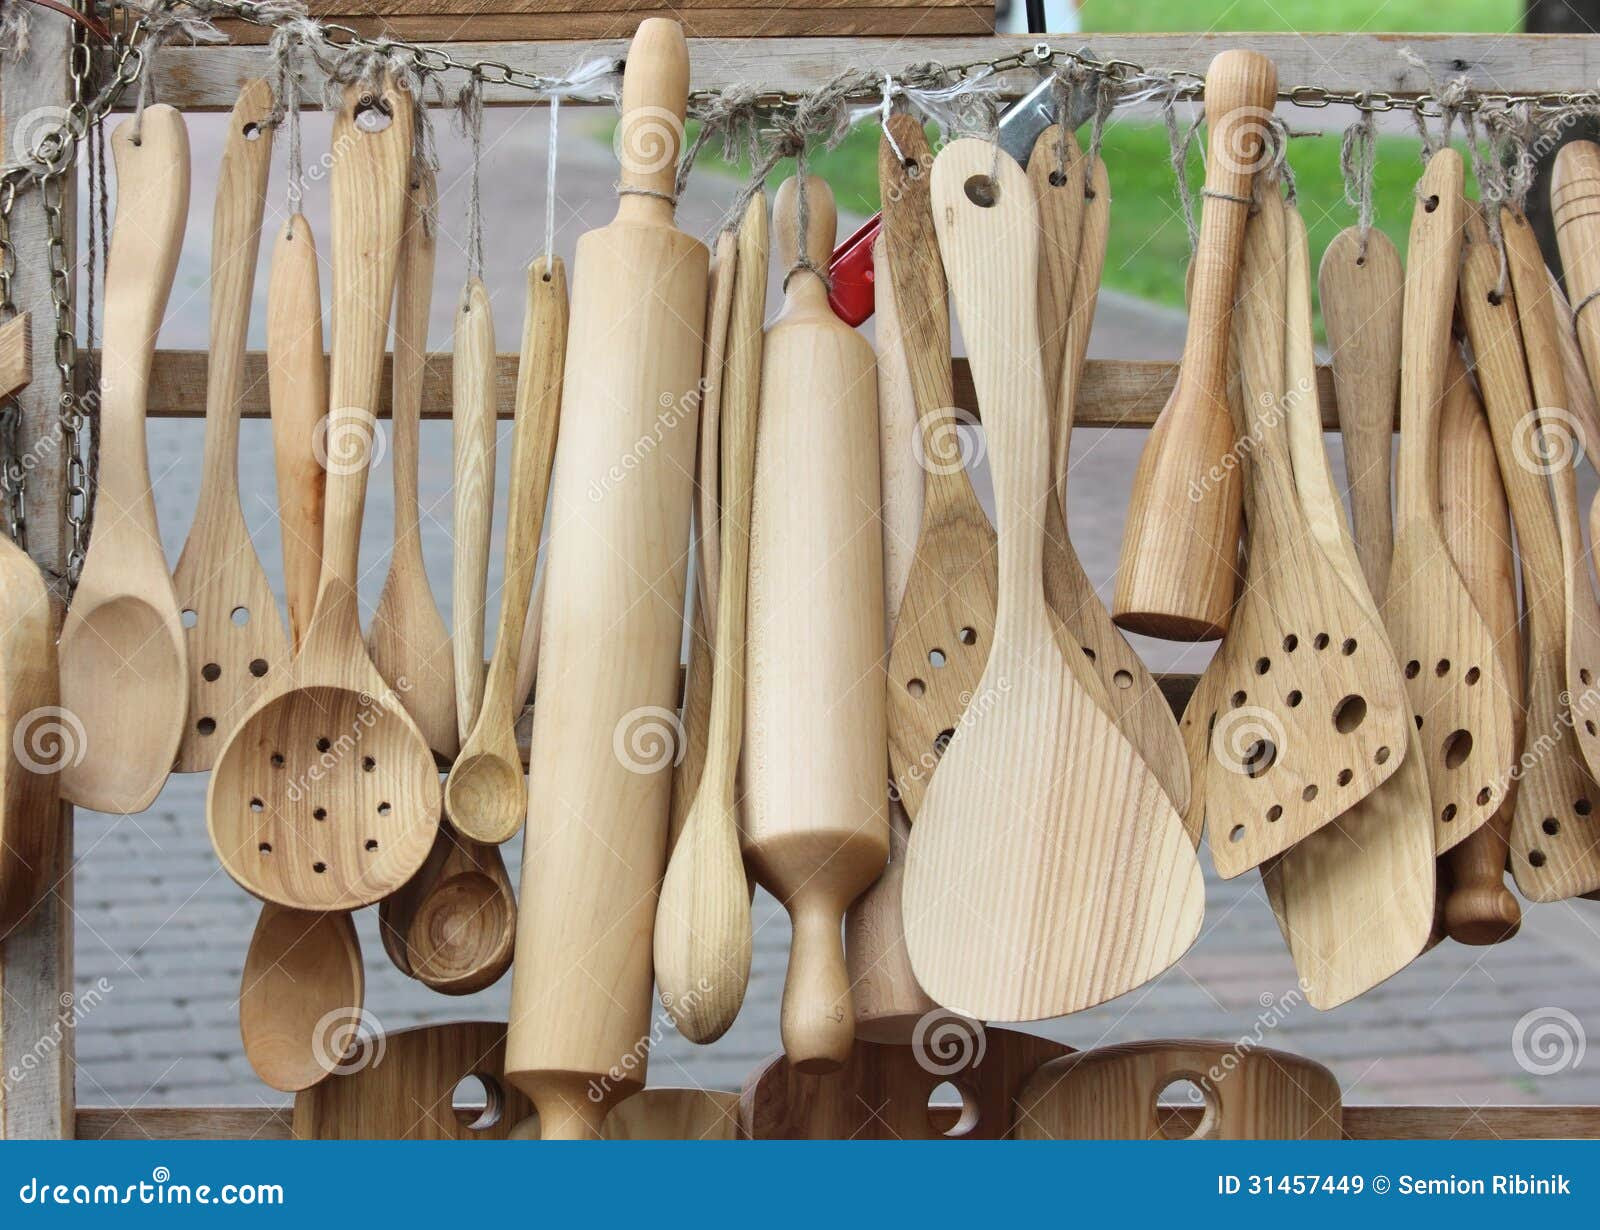 Wooden Kitchen Tools Royalty Free Stock Images - Image: 31457449